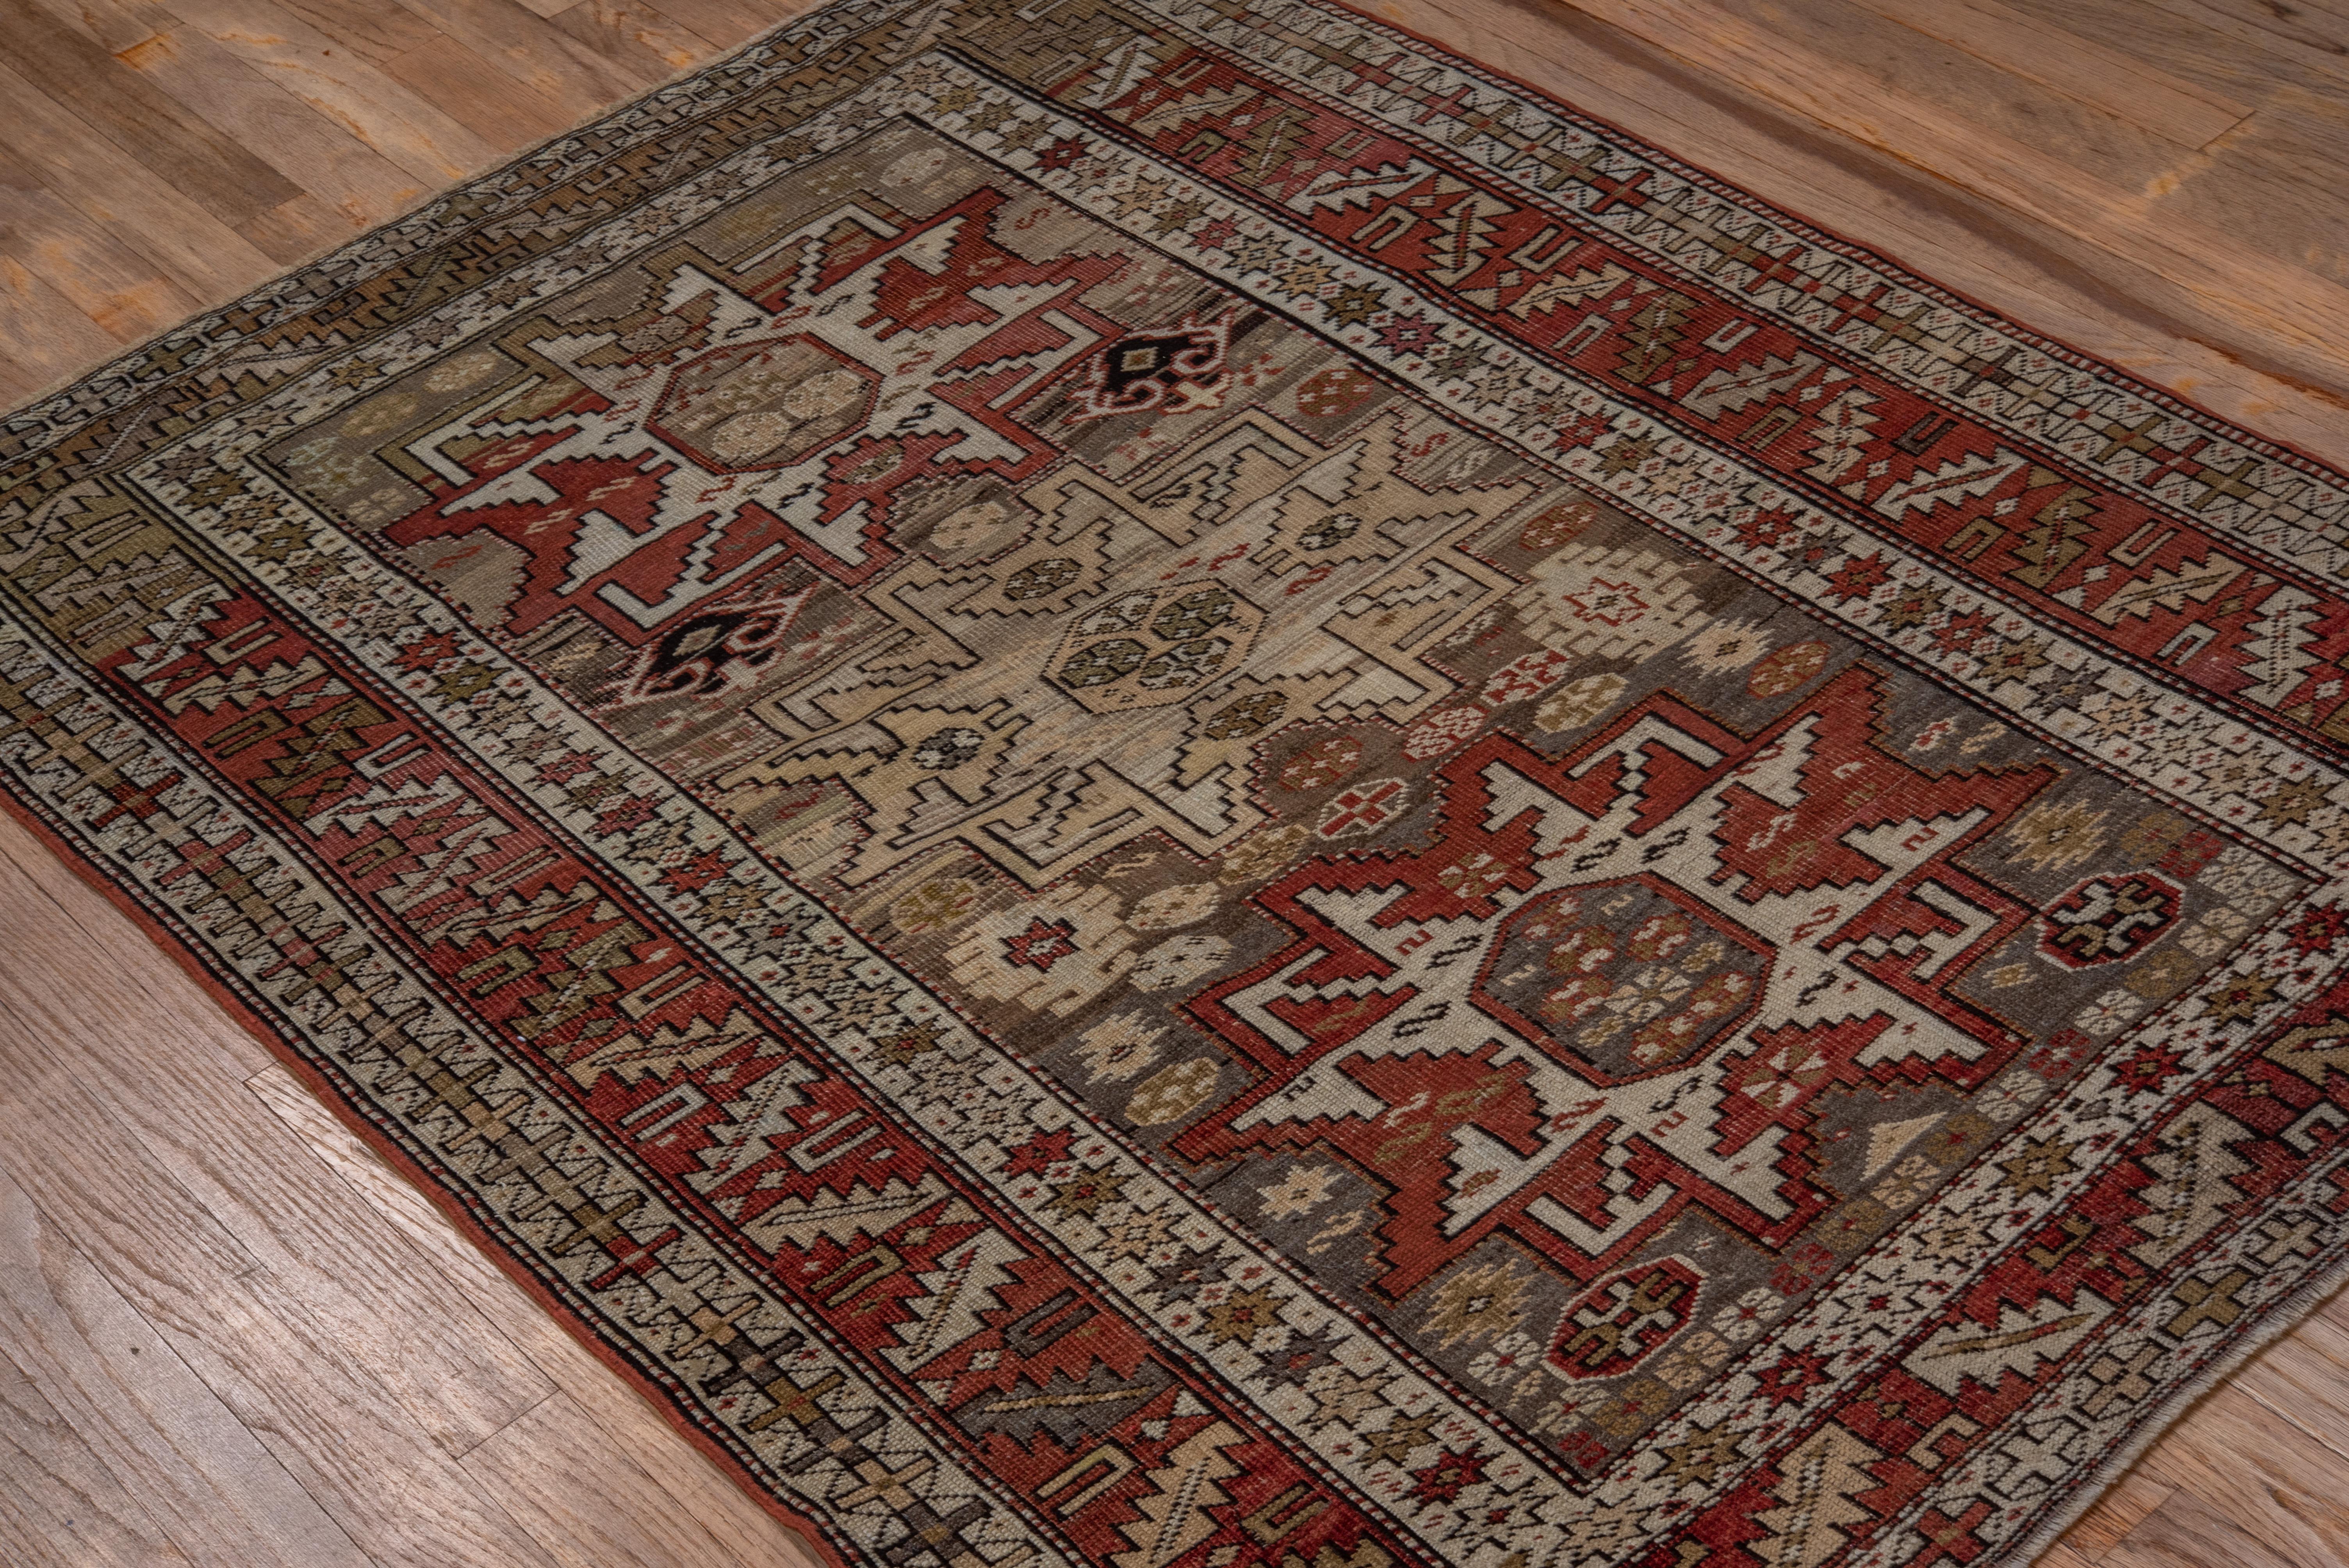 Hand-Knotted Beautiful Antique Caucasian Shirvan Rug, Multicolored Field, Circa 1910s For Sale